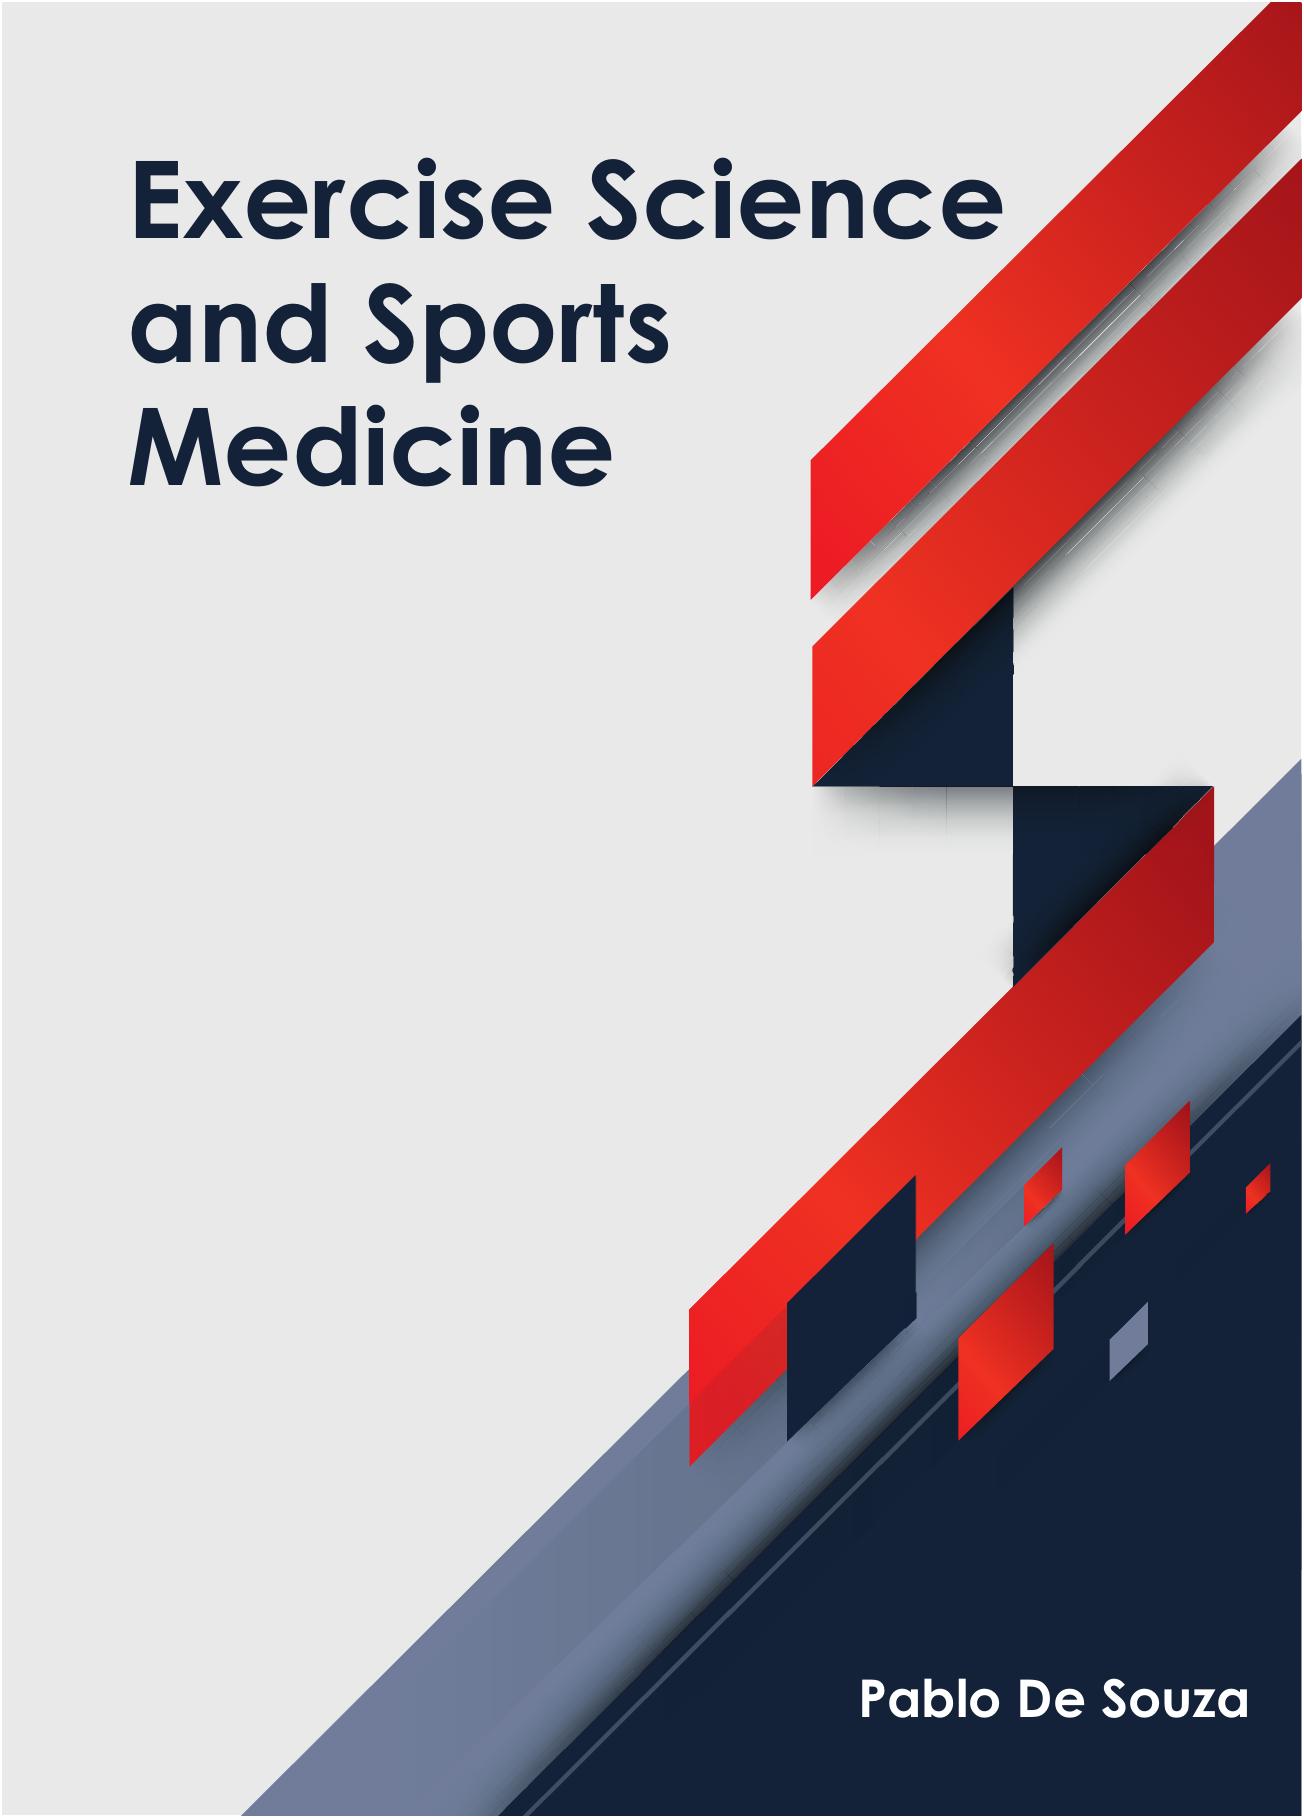 Exercise Science and Sports Medicine 2016